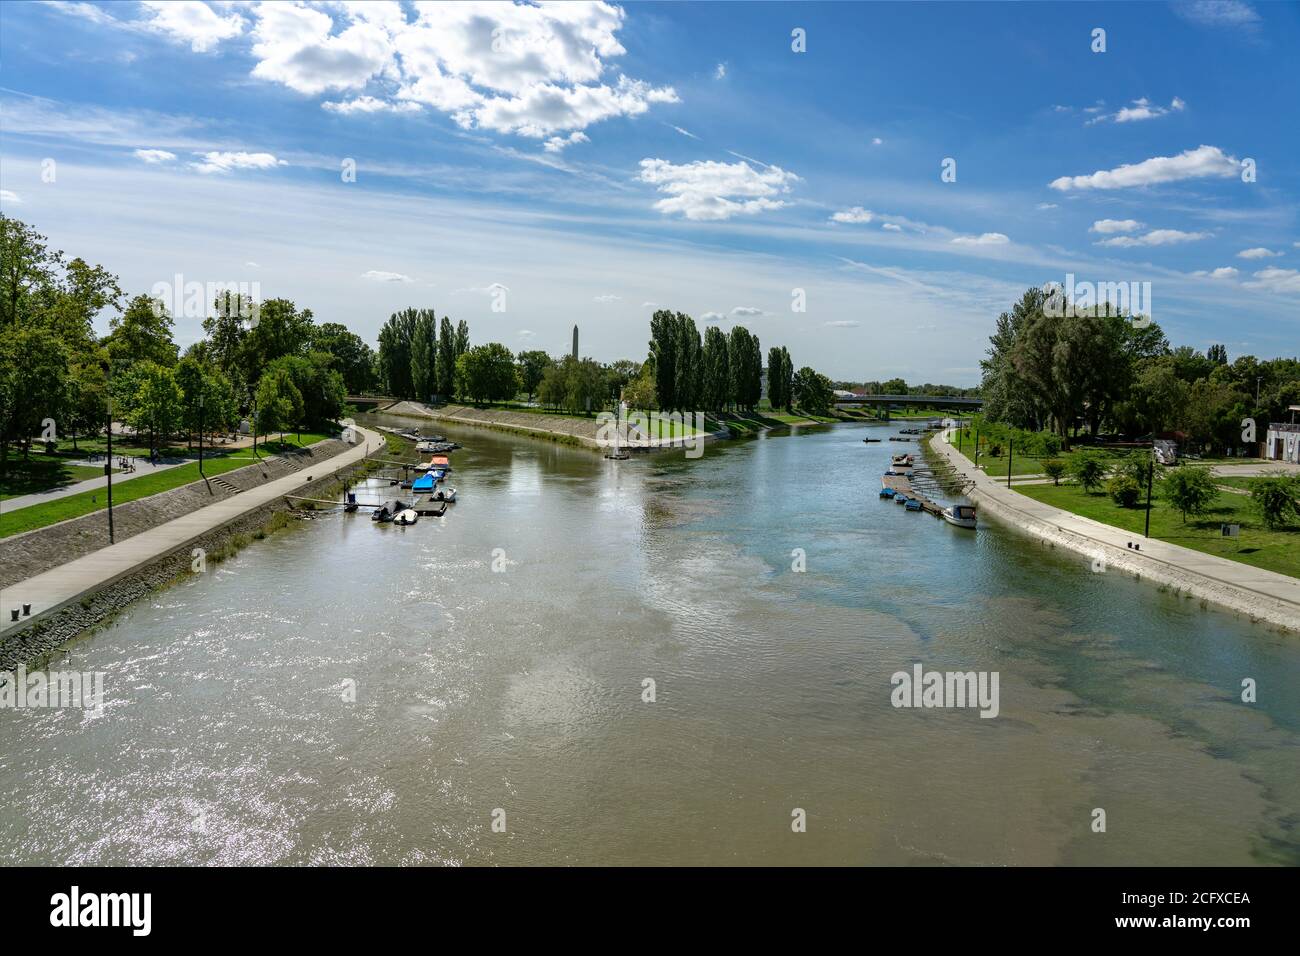 Danube and Raab rivers flows together in Gyor Hungary Stock Photo